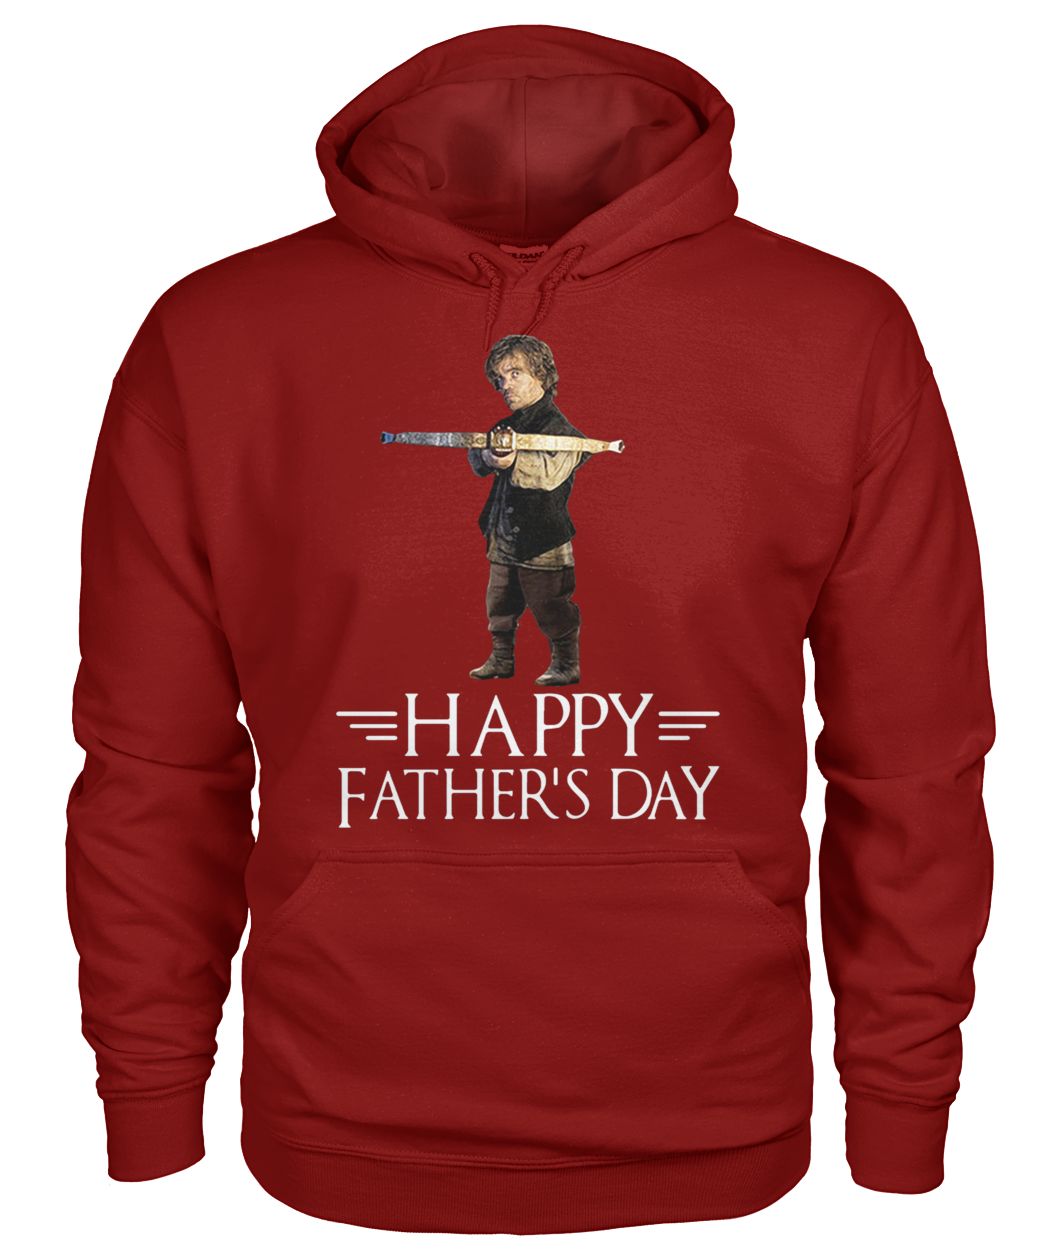 Tyrion lannister killing father happy father's day game of thrones gildan hoodie